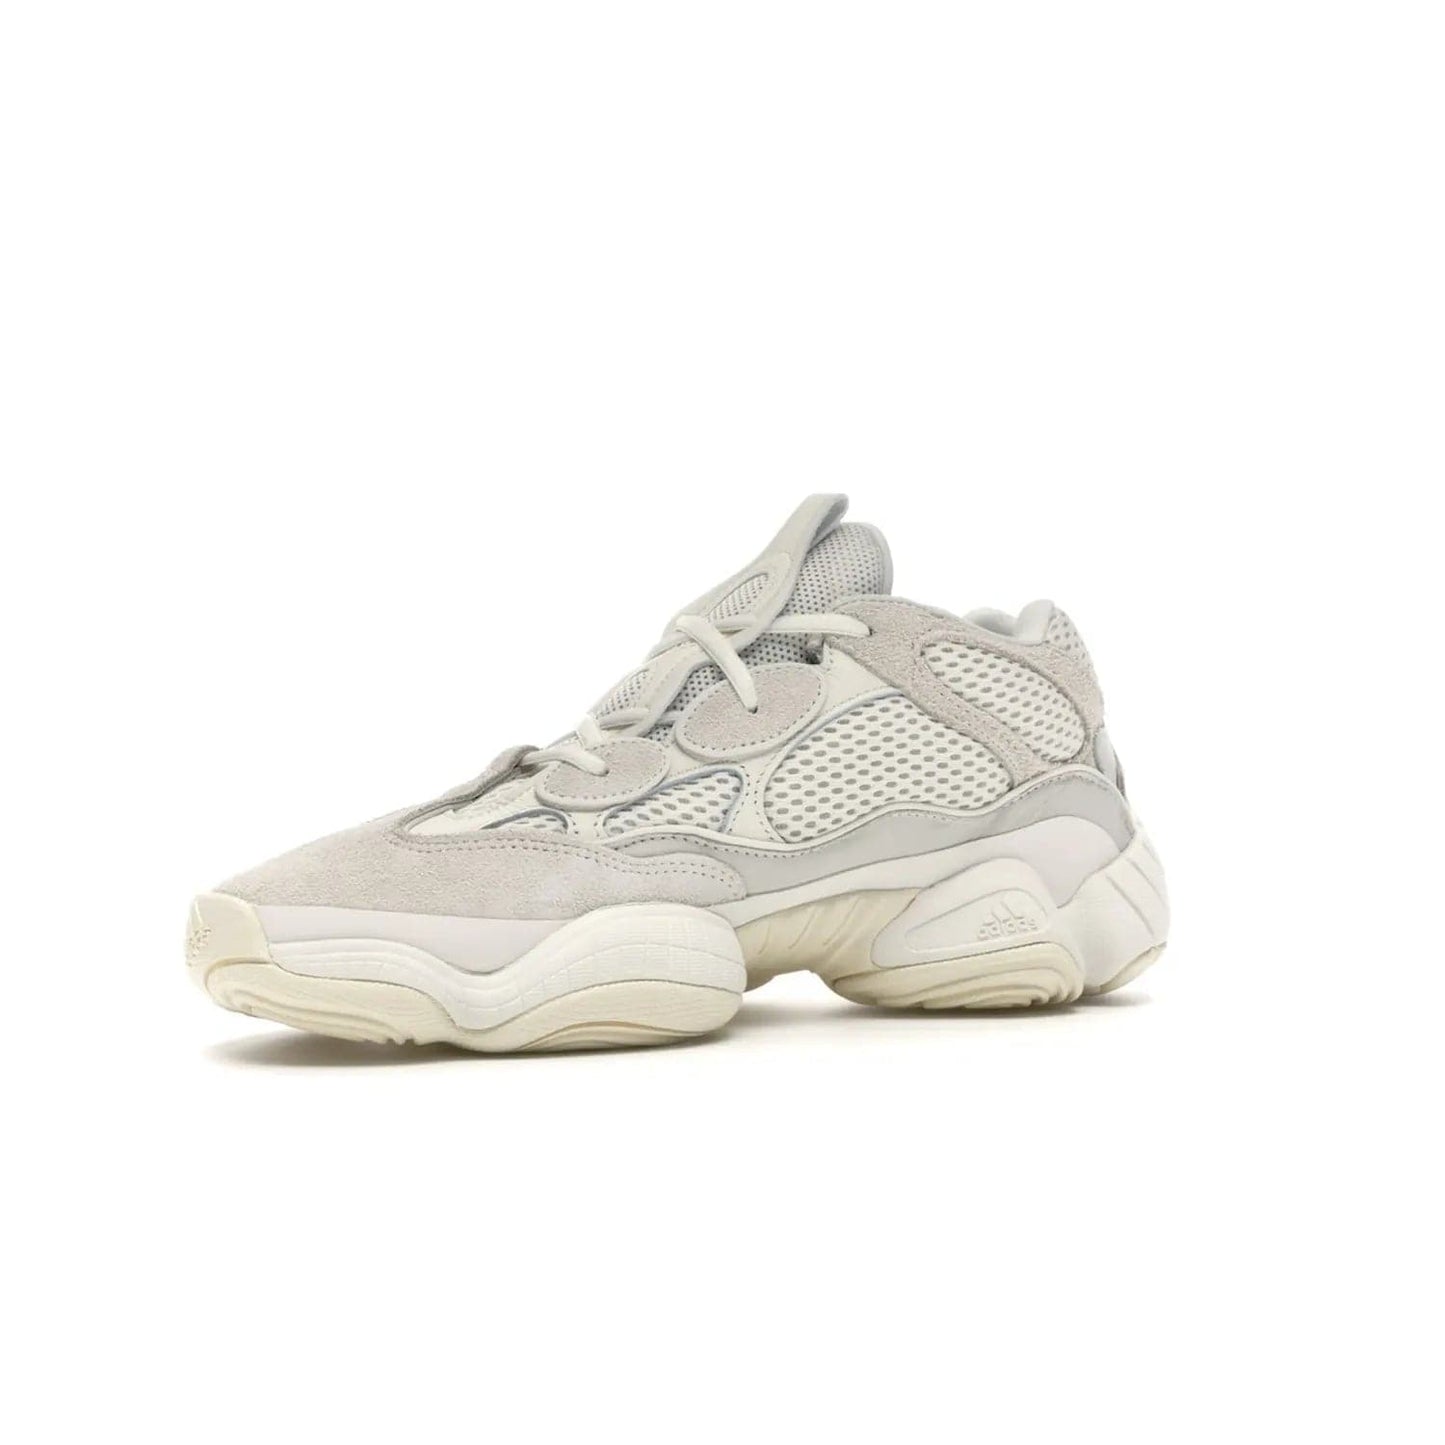 adidas Yeezy 500 Bone White - Image 16 - Only at www.BallersClubKickz.com - Classic look perfect for any sneaker collection. The adidas Yeezy 500 "Bone White" blends a white mesh upper with suede overlays & a chunky midsole inspired by the Adidas KB3. Complimented by a tonal-cream outsole, this timeless style is a must-have.